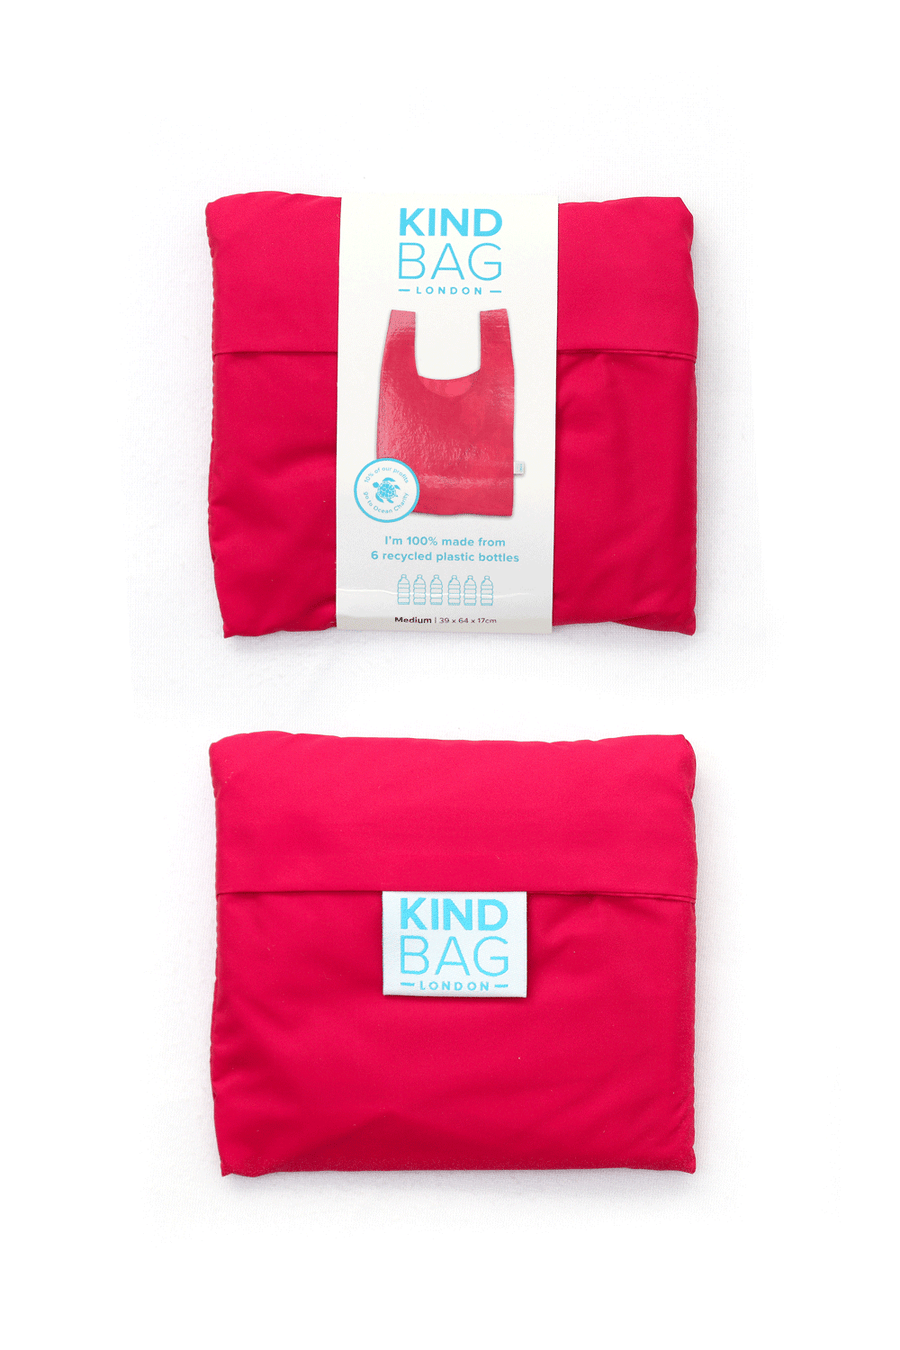 Kind Bag Berry Pink Reusable Bag Folded into Pouch